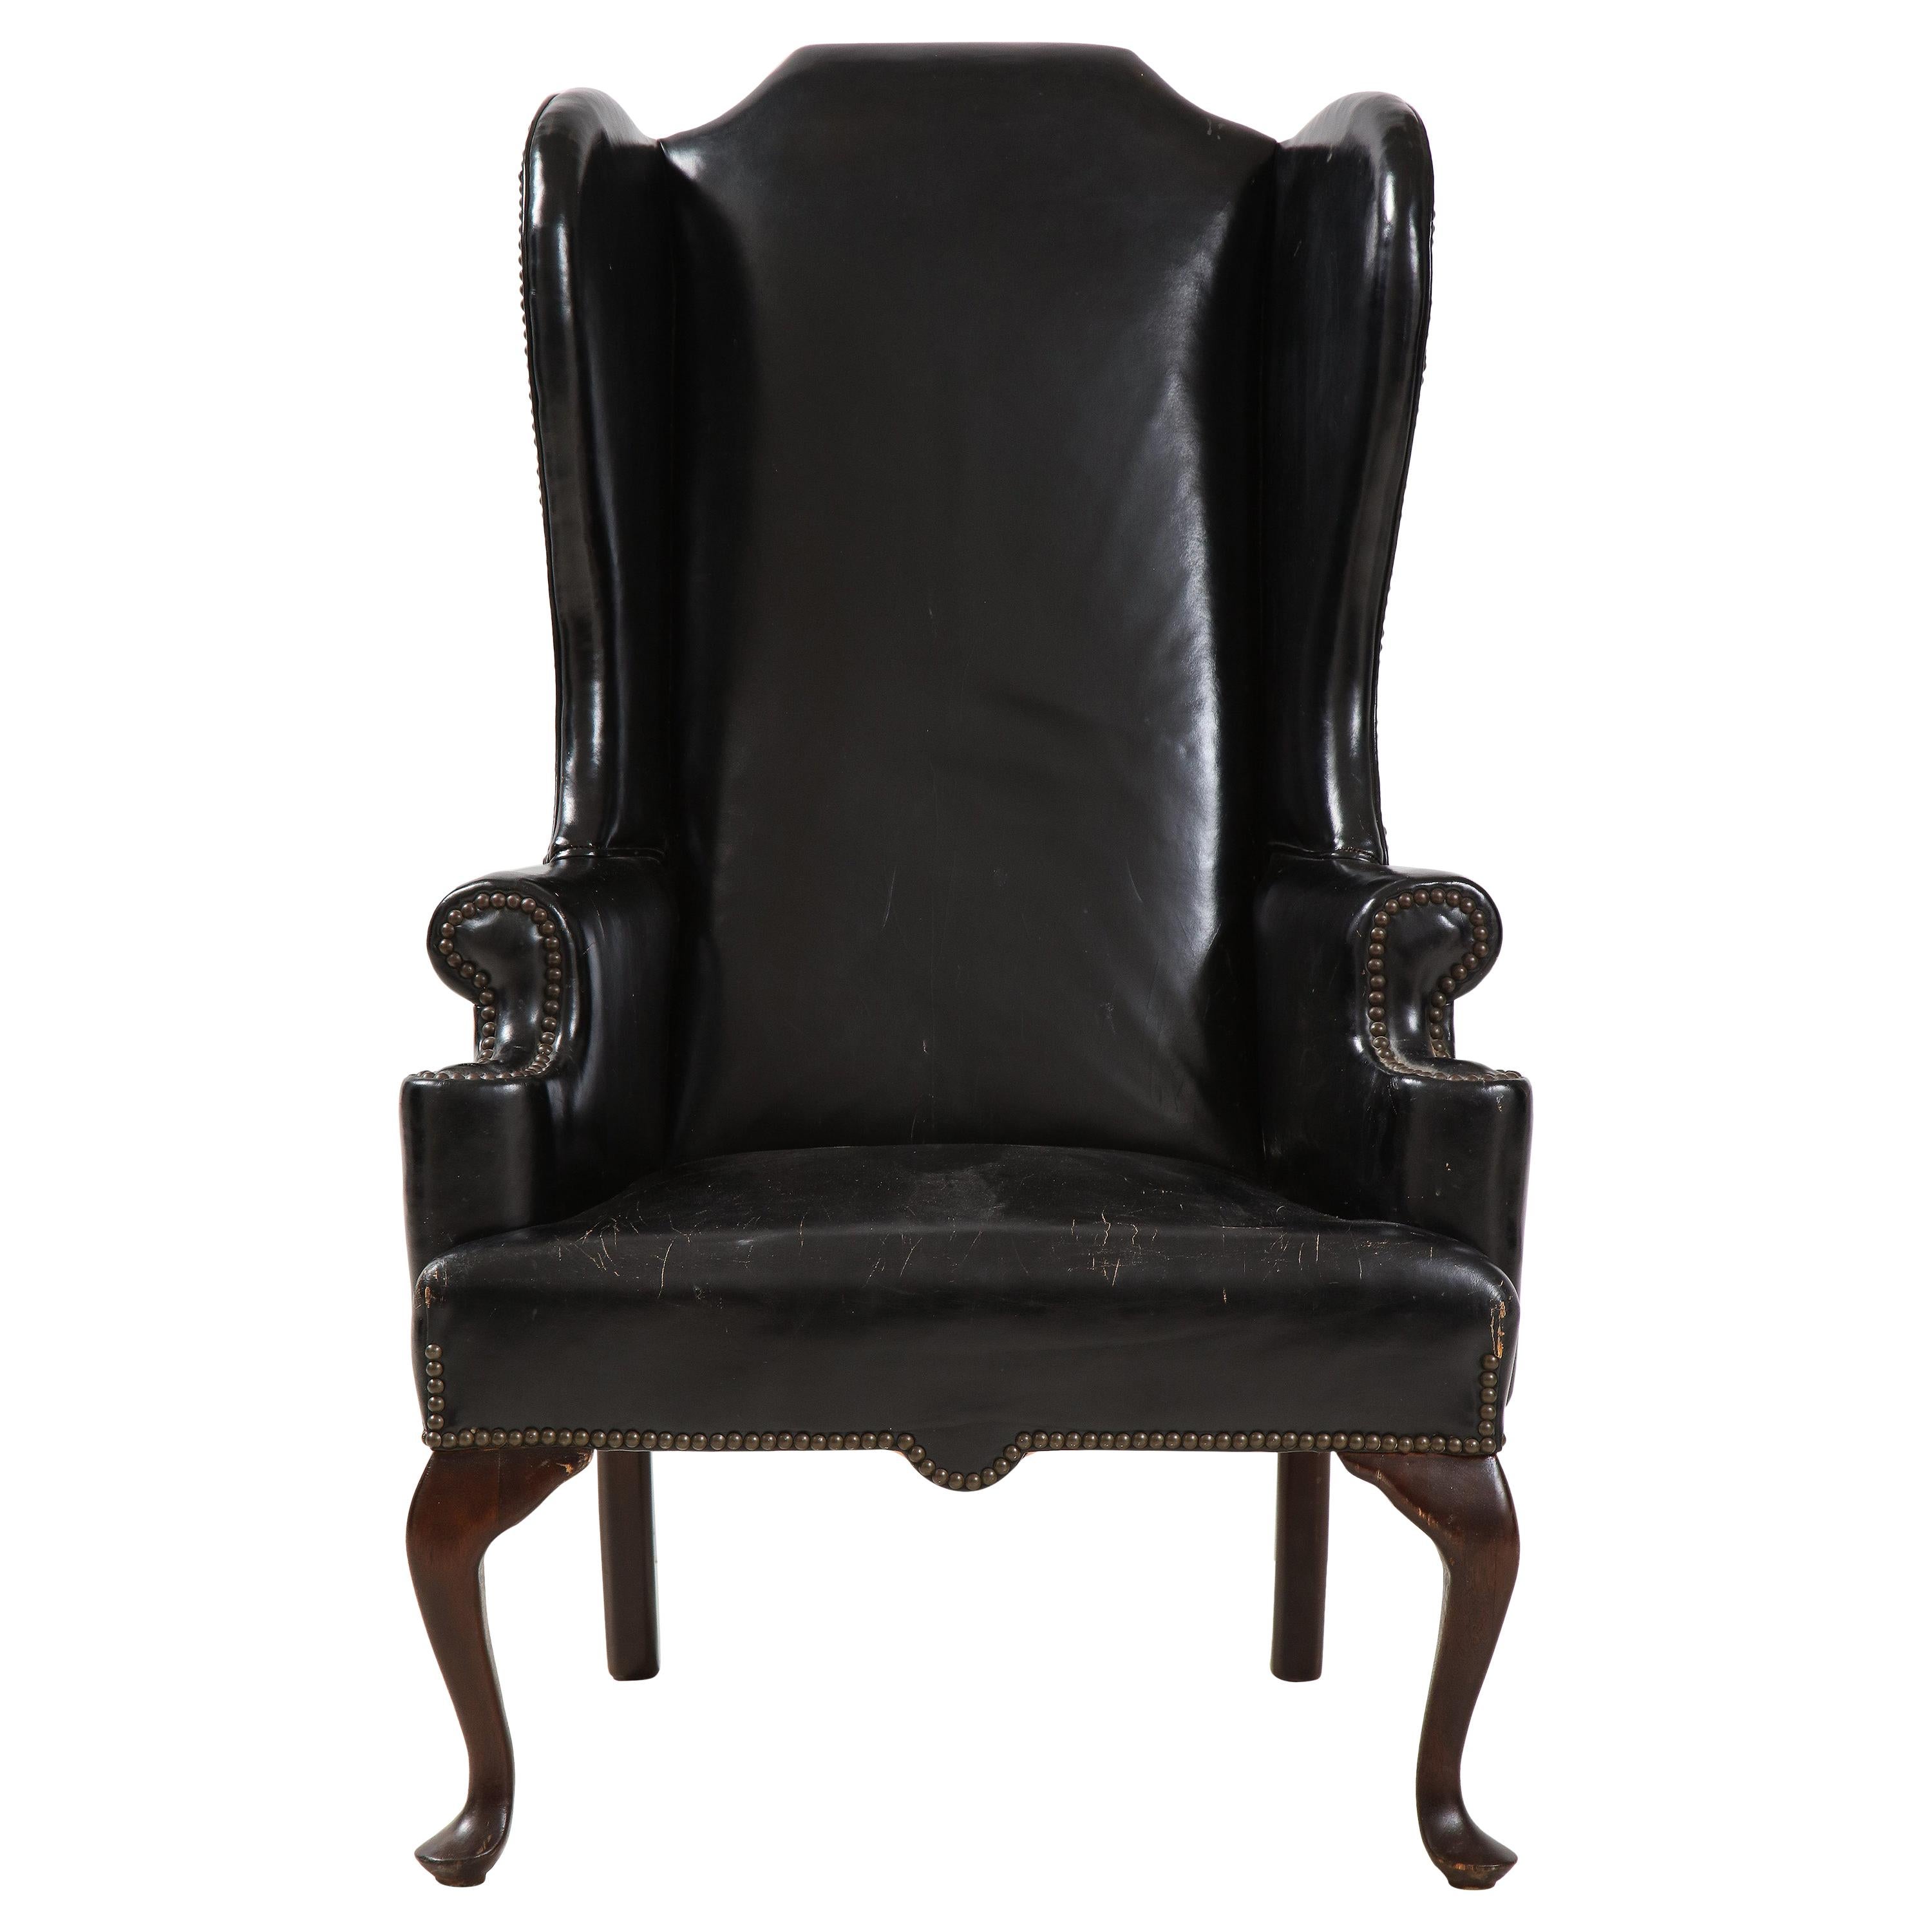 George II Style Mahogany and Black Leather Upholstered Wing Chair